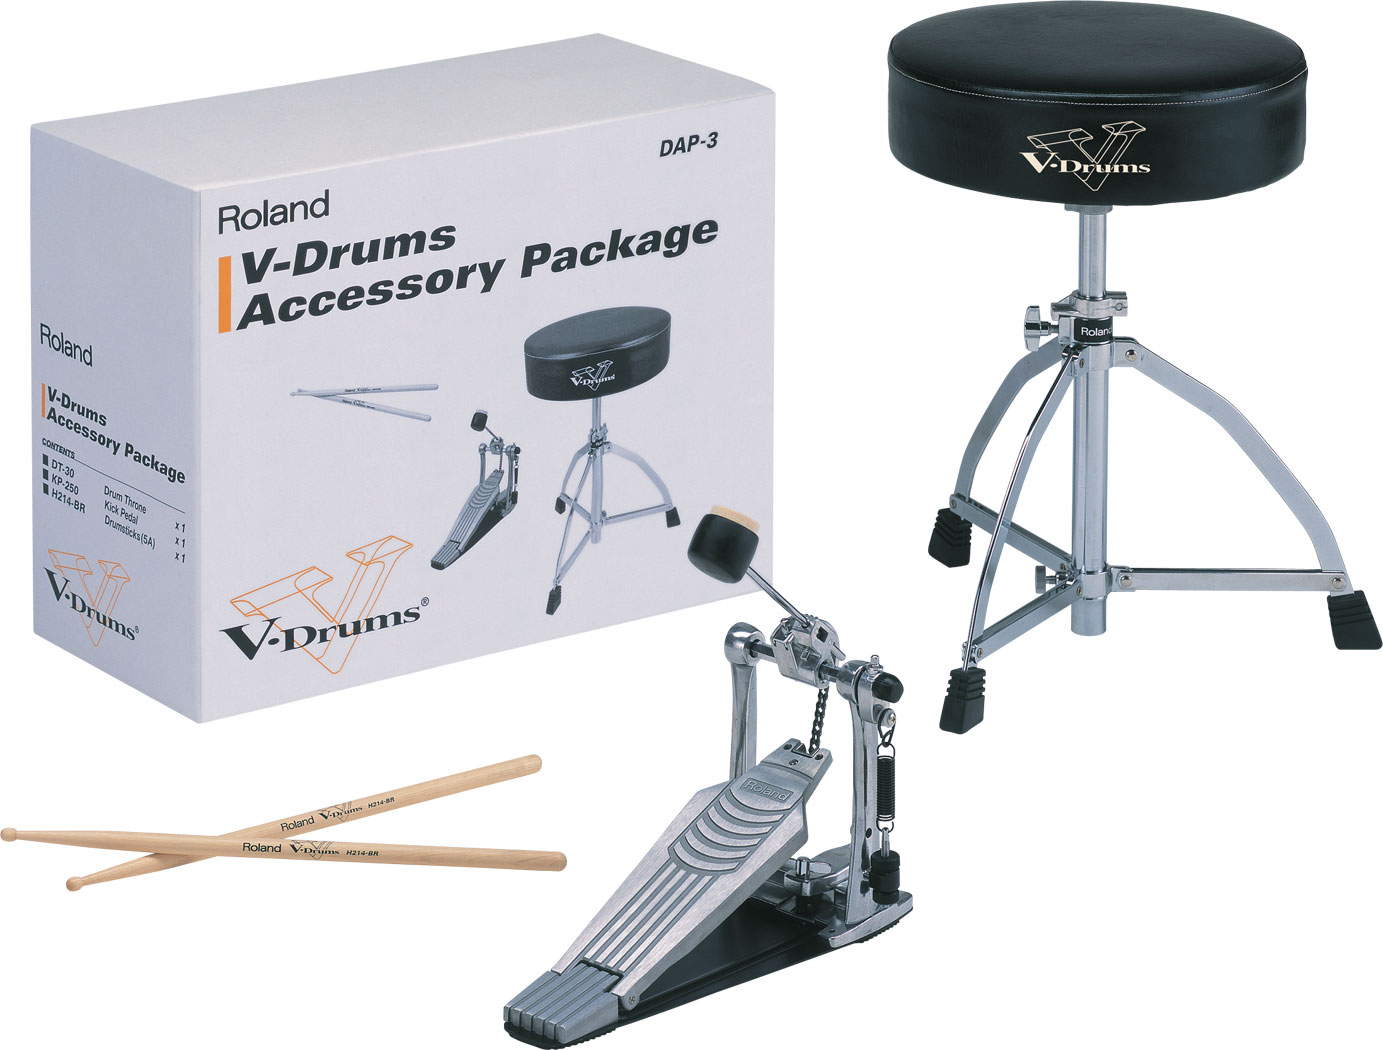 Roland Dap 3 V Drums Accessory Package